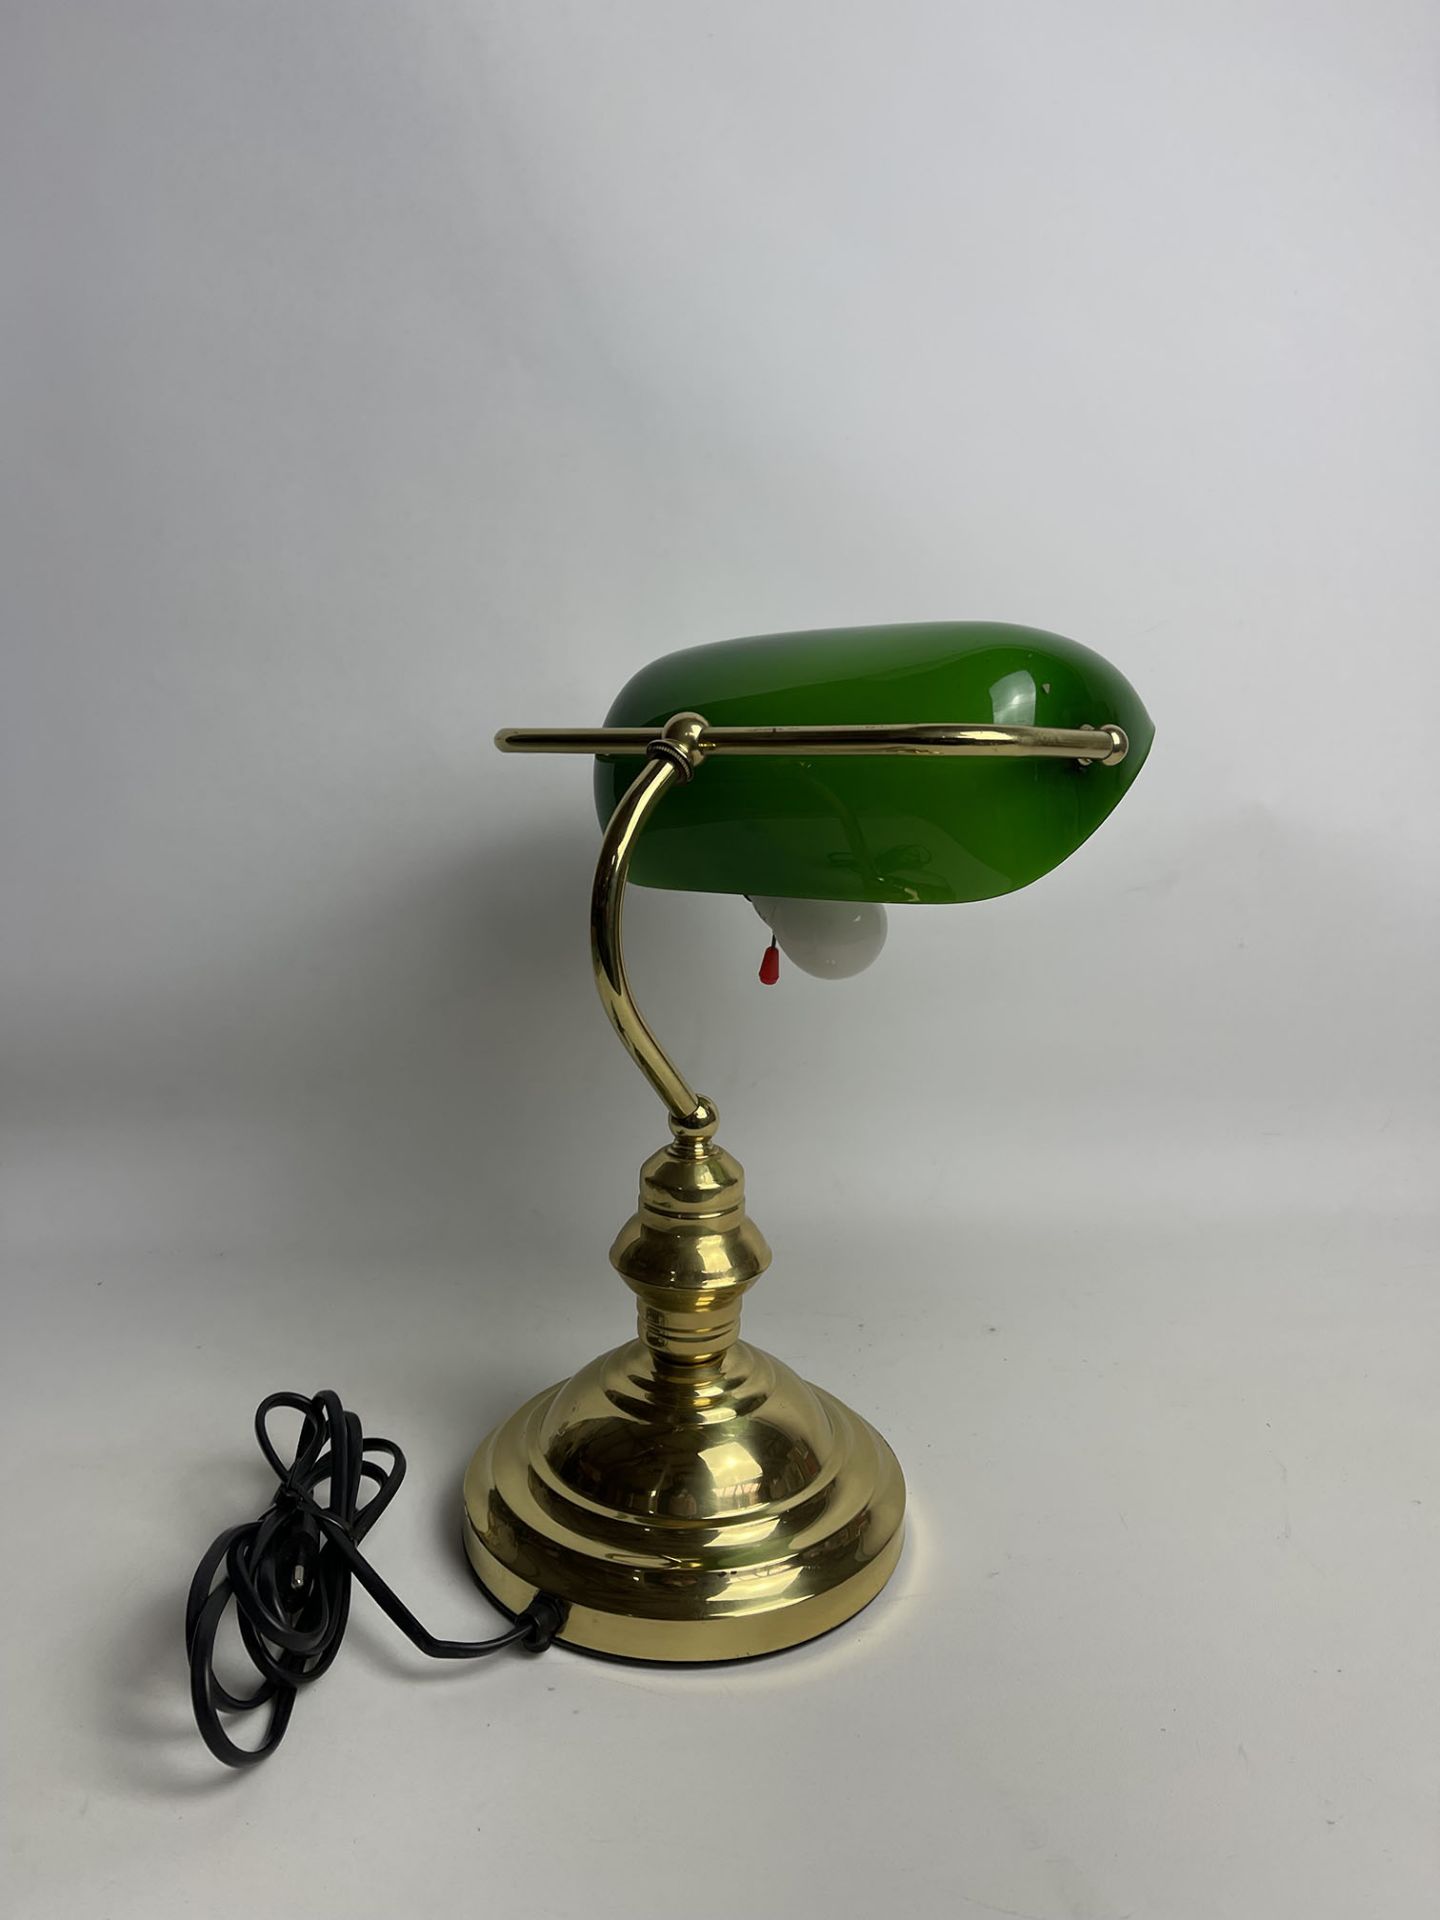 Vintage American Desk Lamp with Green Lamp Shade - Image 4 of 9